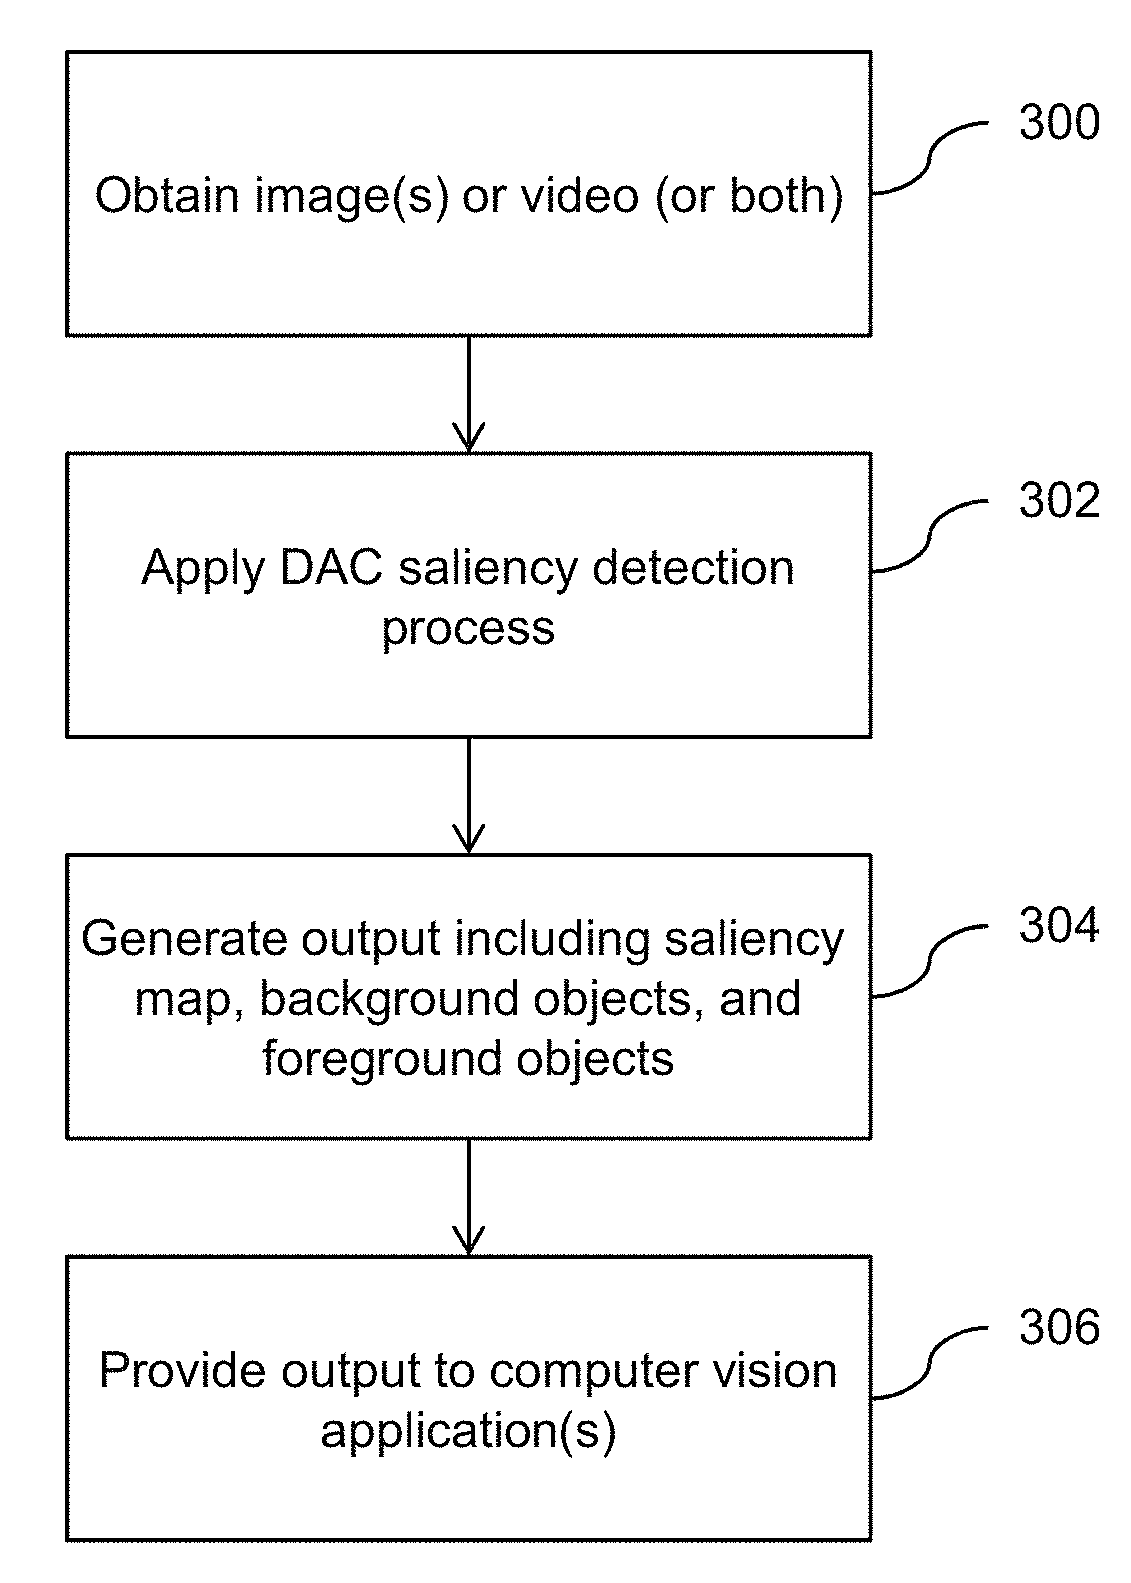 System and Method for Performing Saliency Detection Using Deep Active Contours